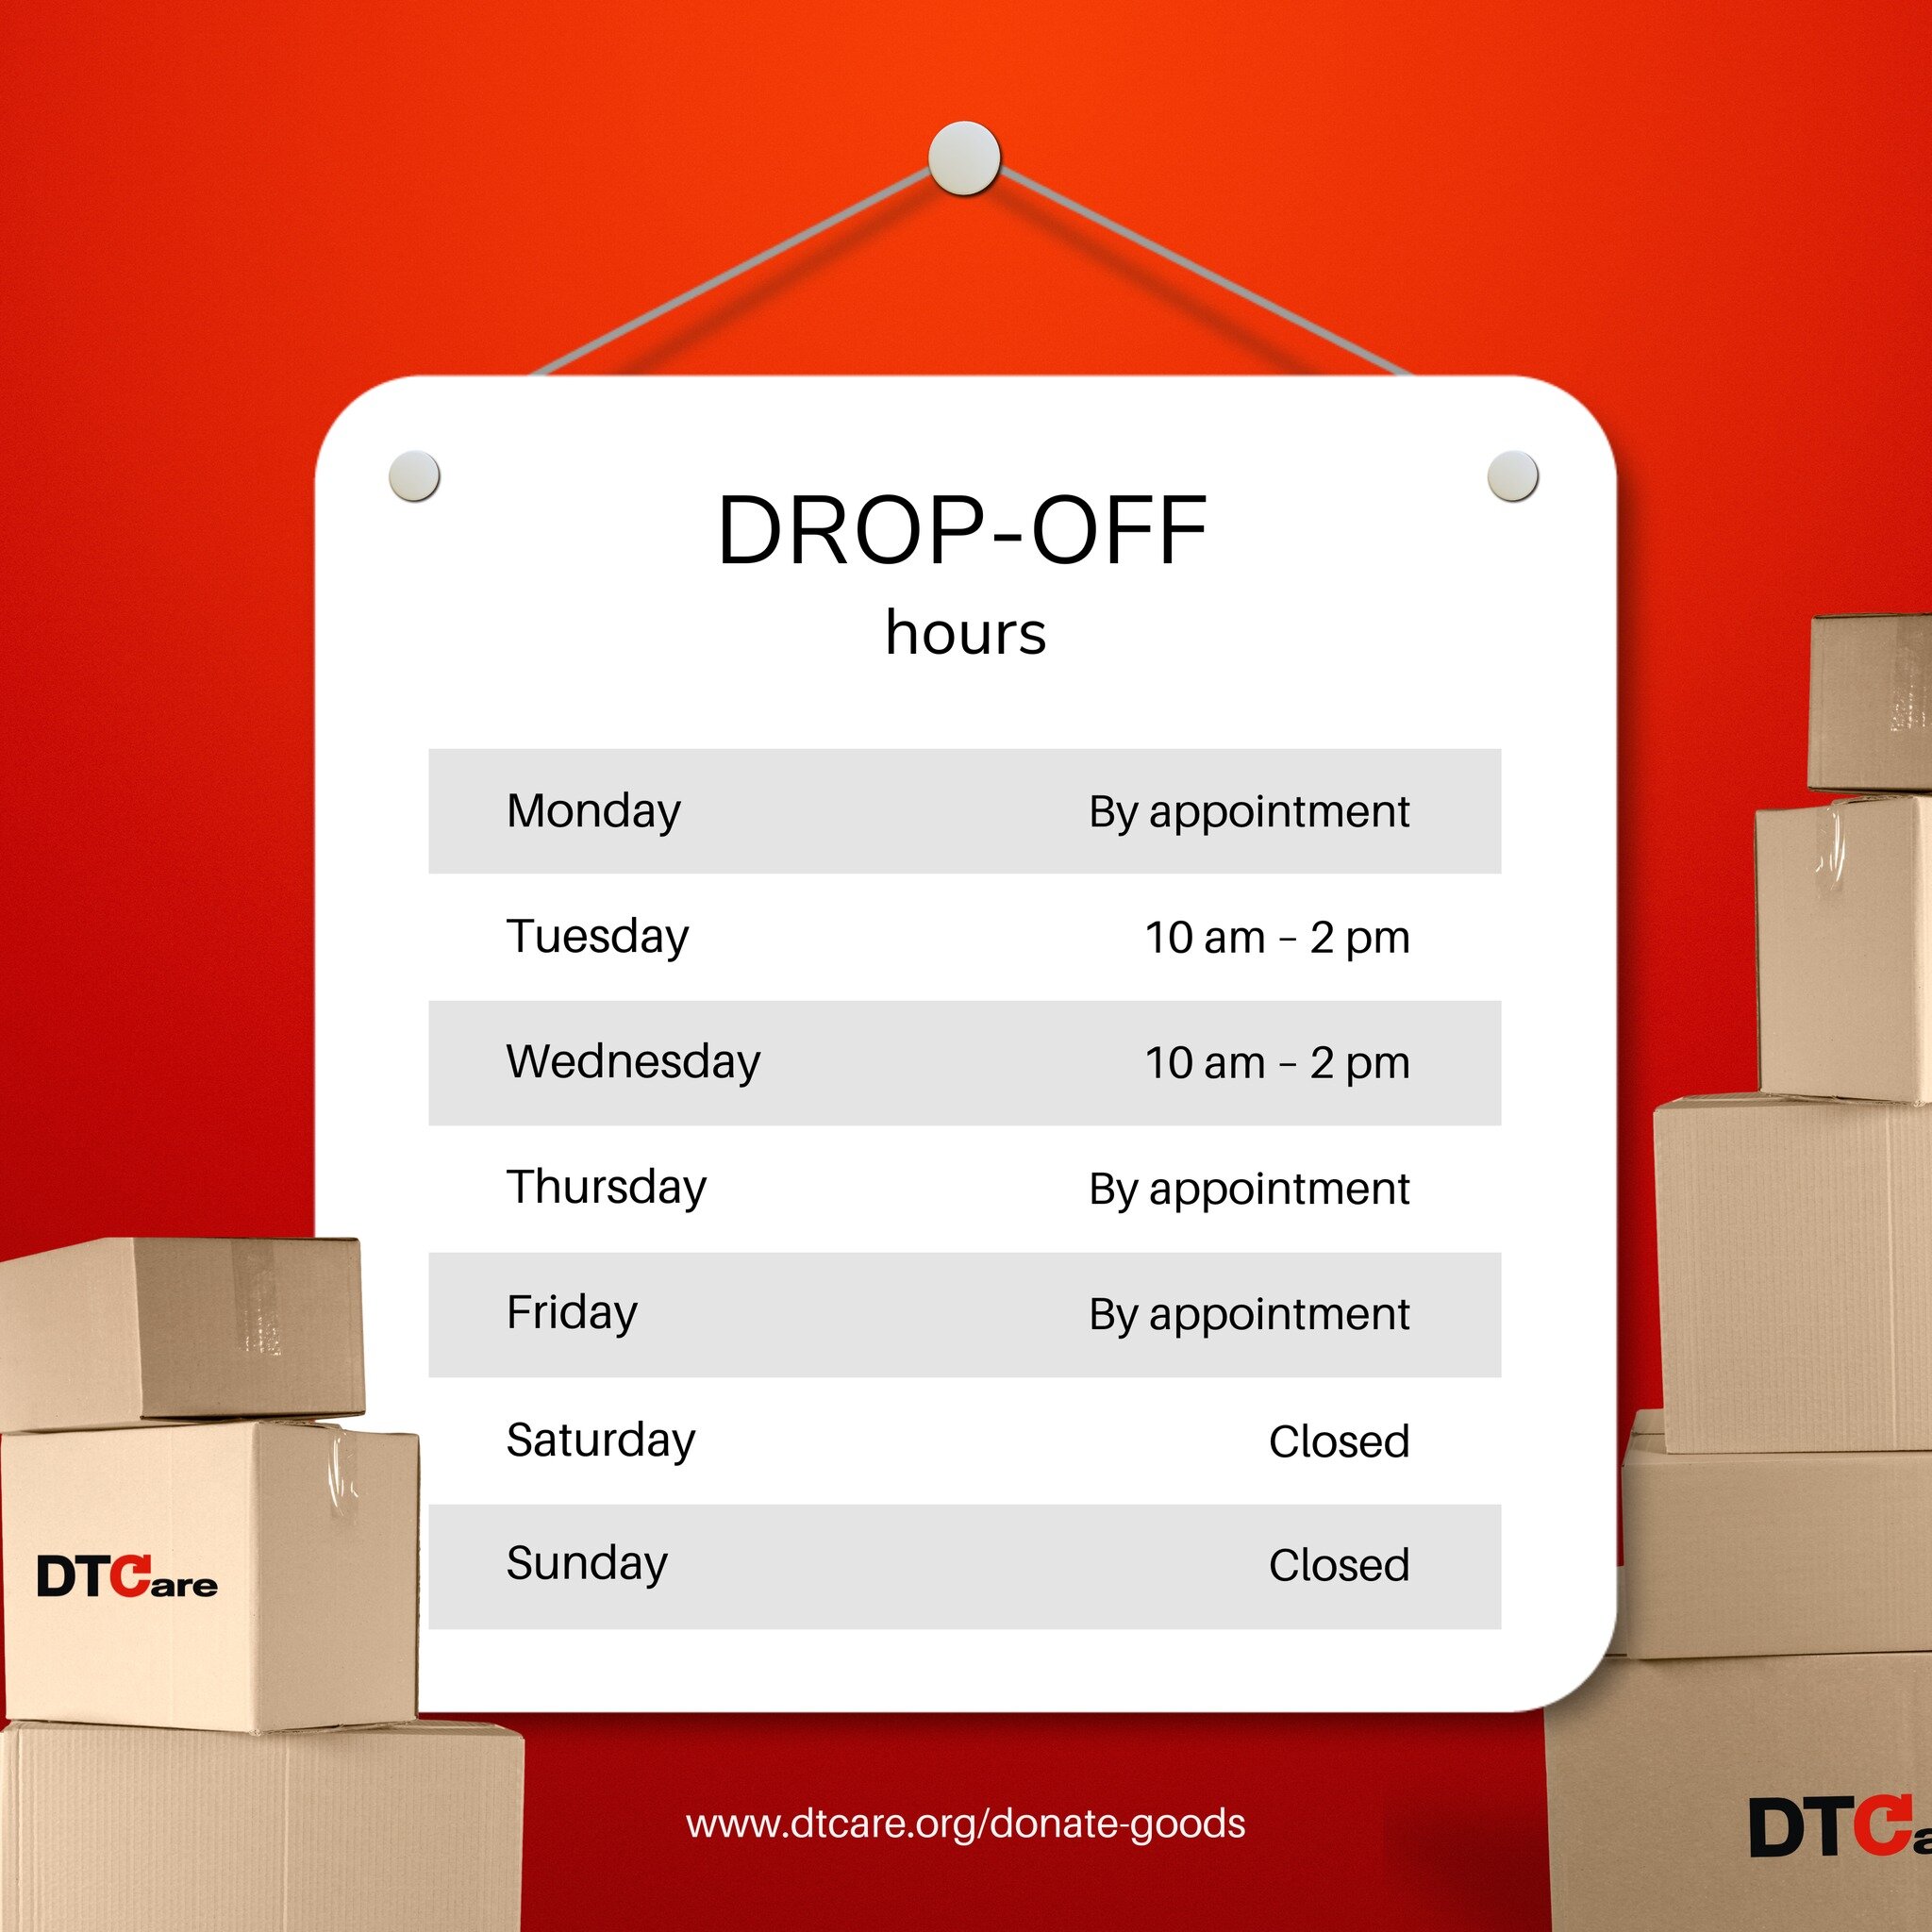 New year, new donation drop-off times! 🕐 DTCare is committed to supporting vulnerable communities around the world. Your generous contributions are fundamental to sending surplus goods from the United States to those who need them most.

To ensure e